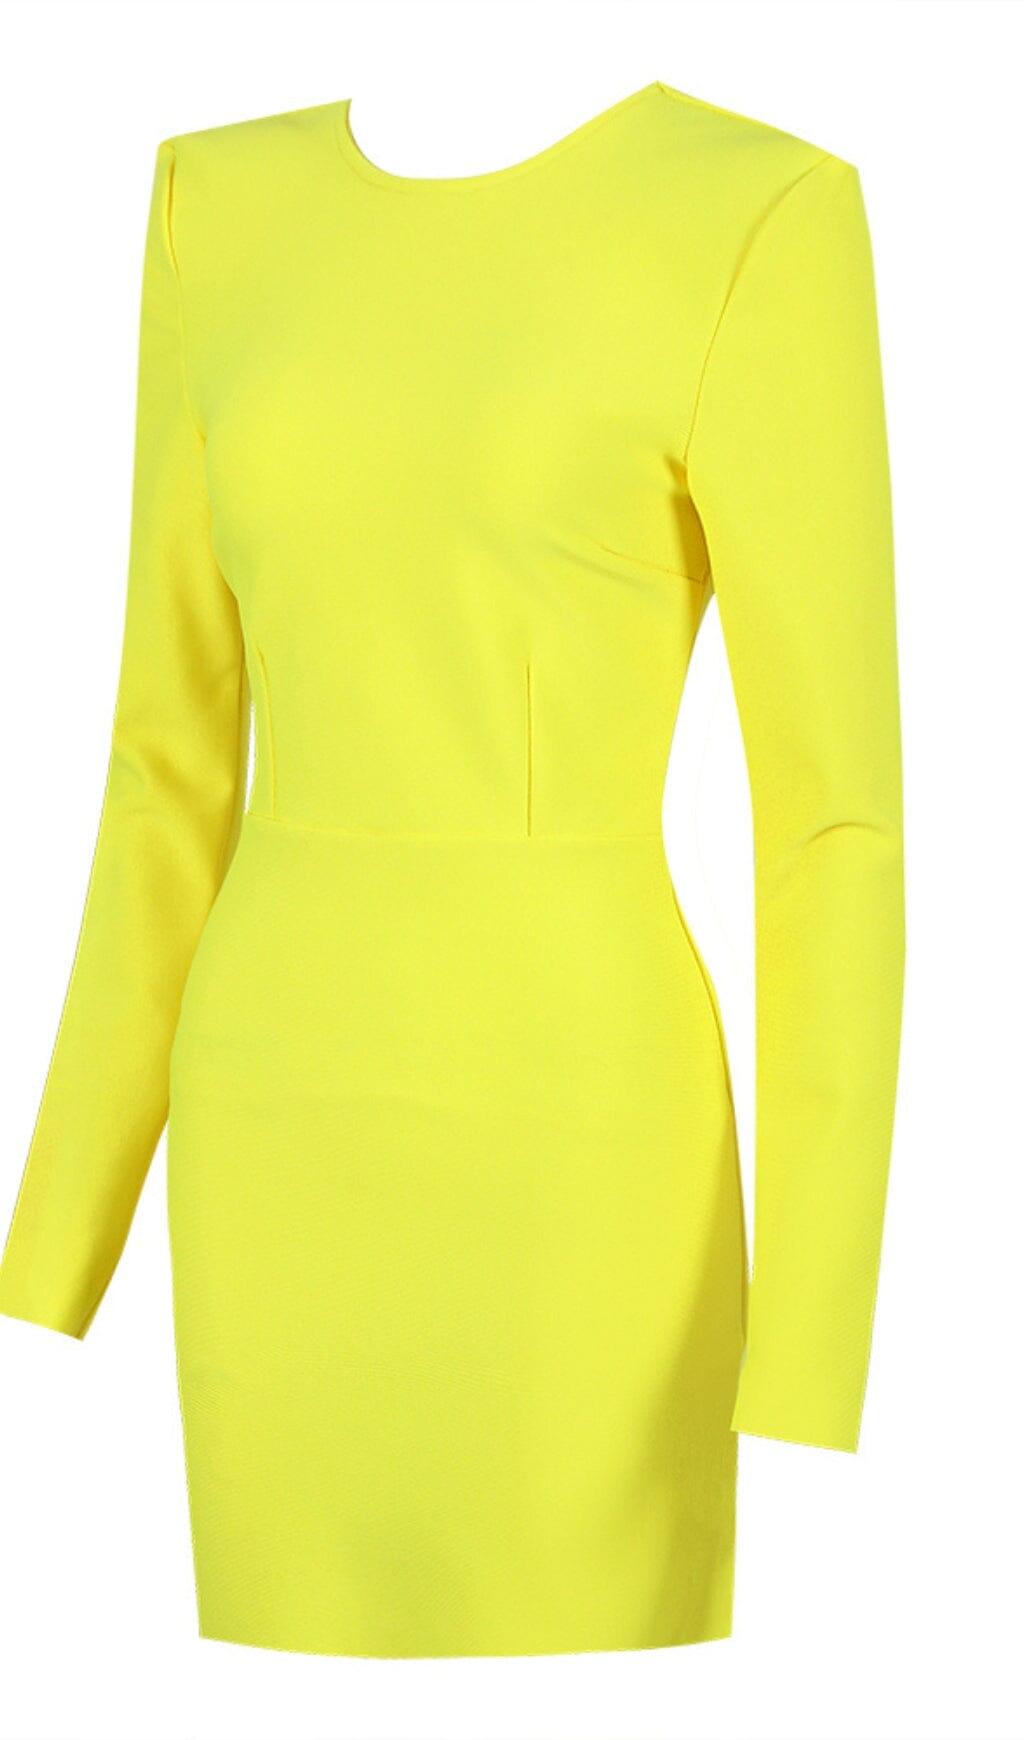 LONG SLEEVE TIGHT BACKLESS DRESS IN YELLOW